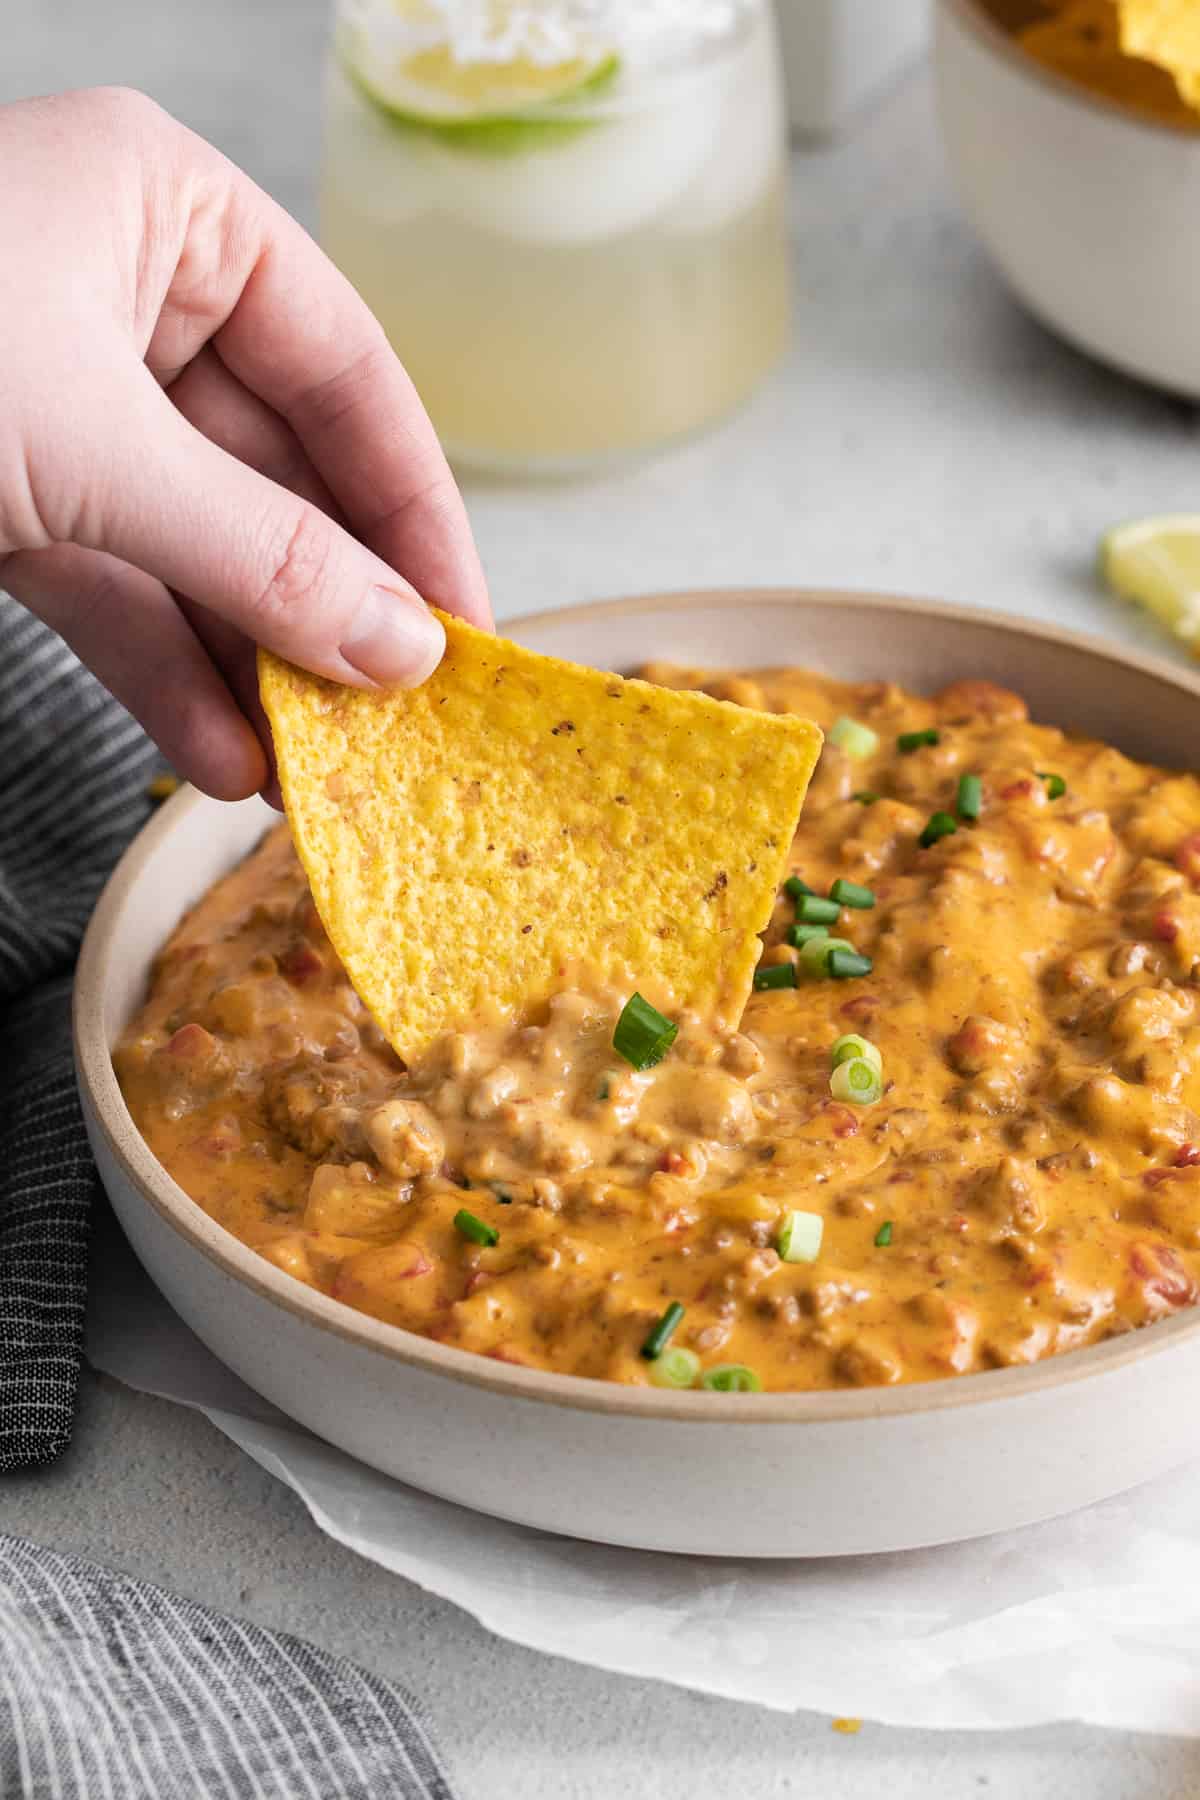 Rotel dip on a chip.